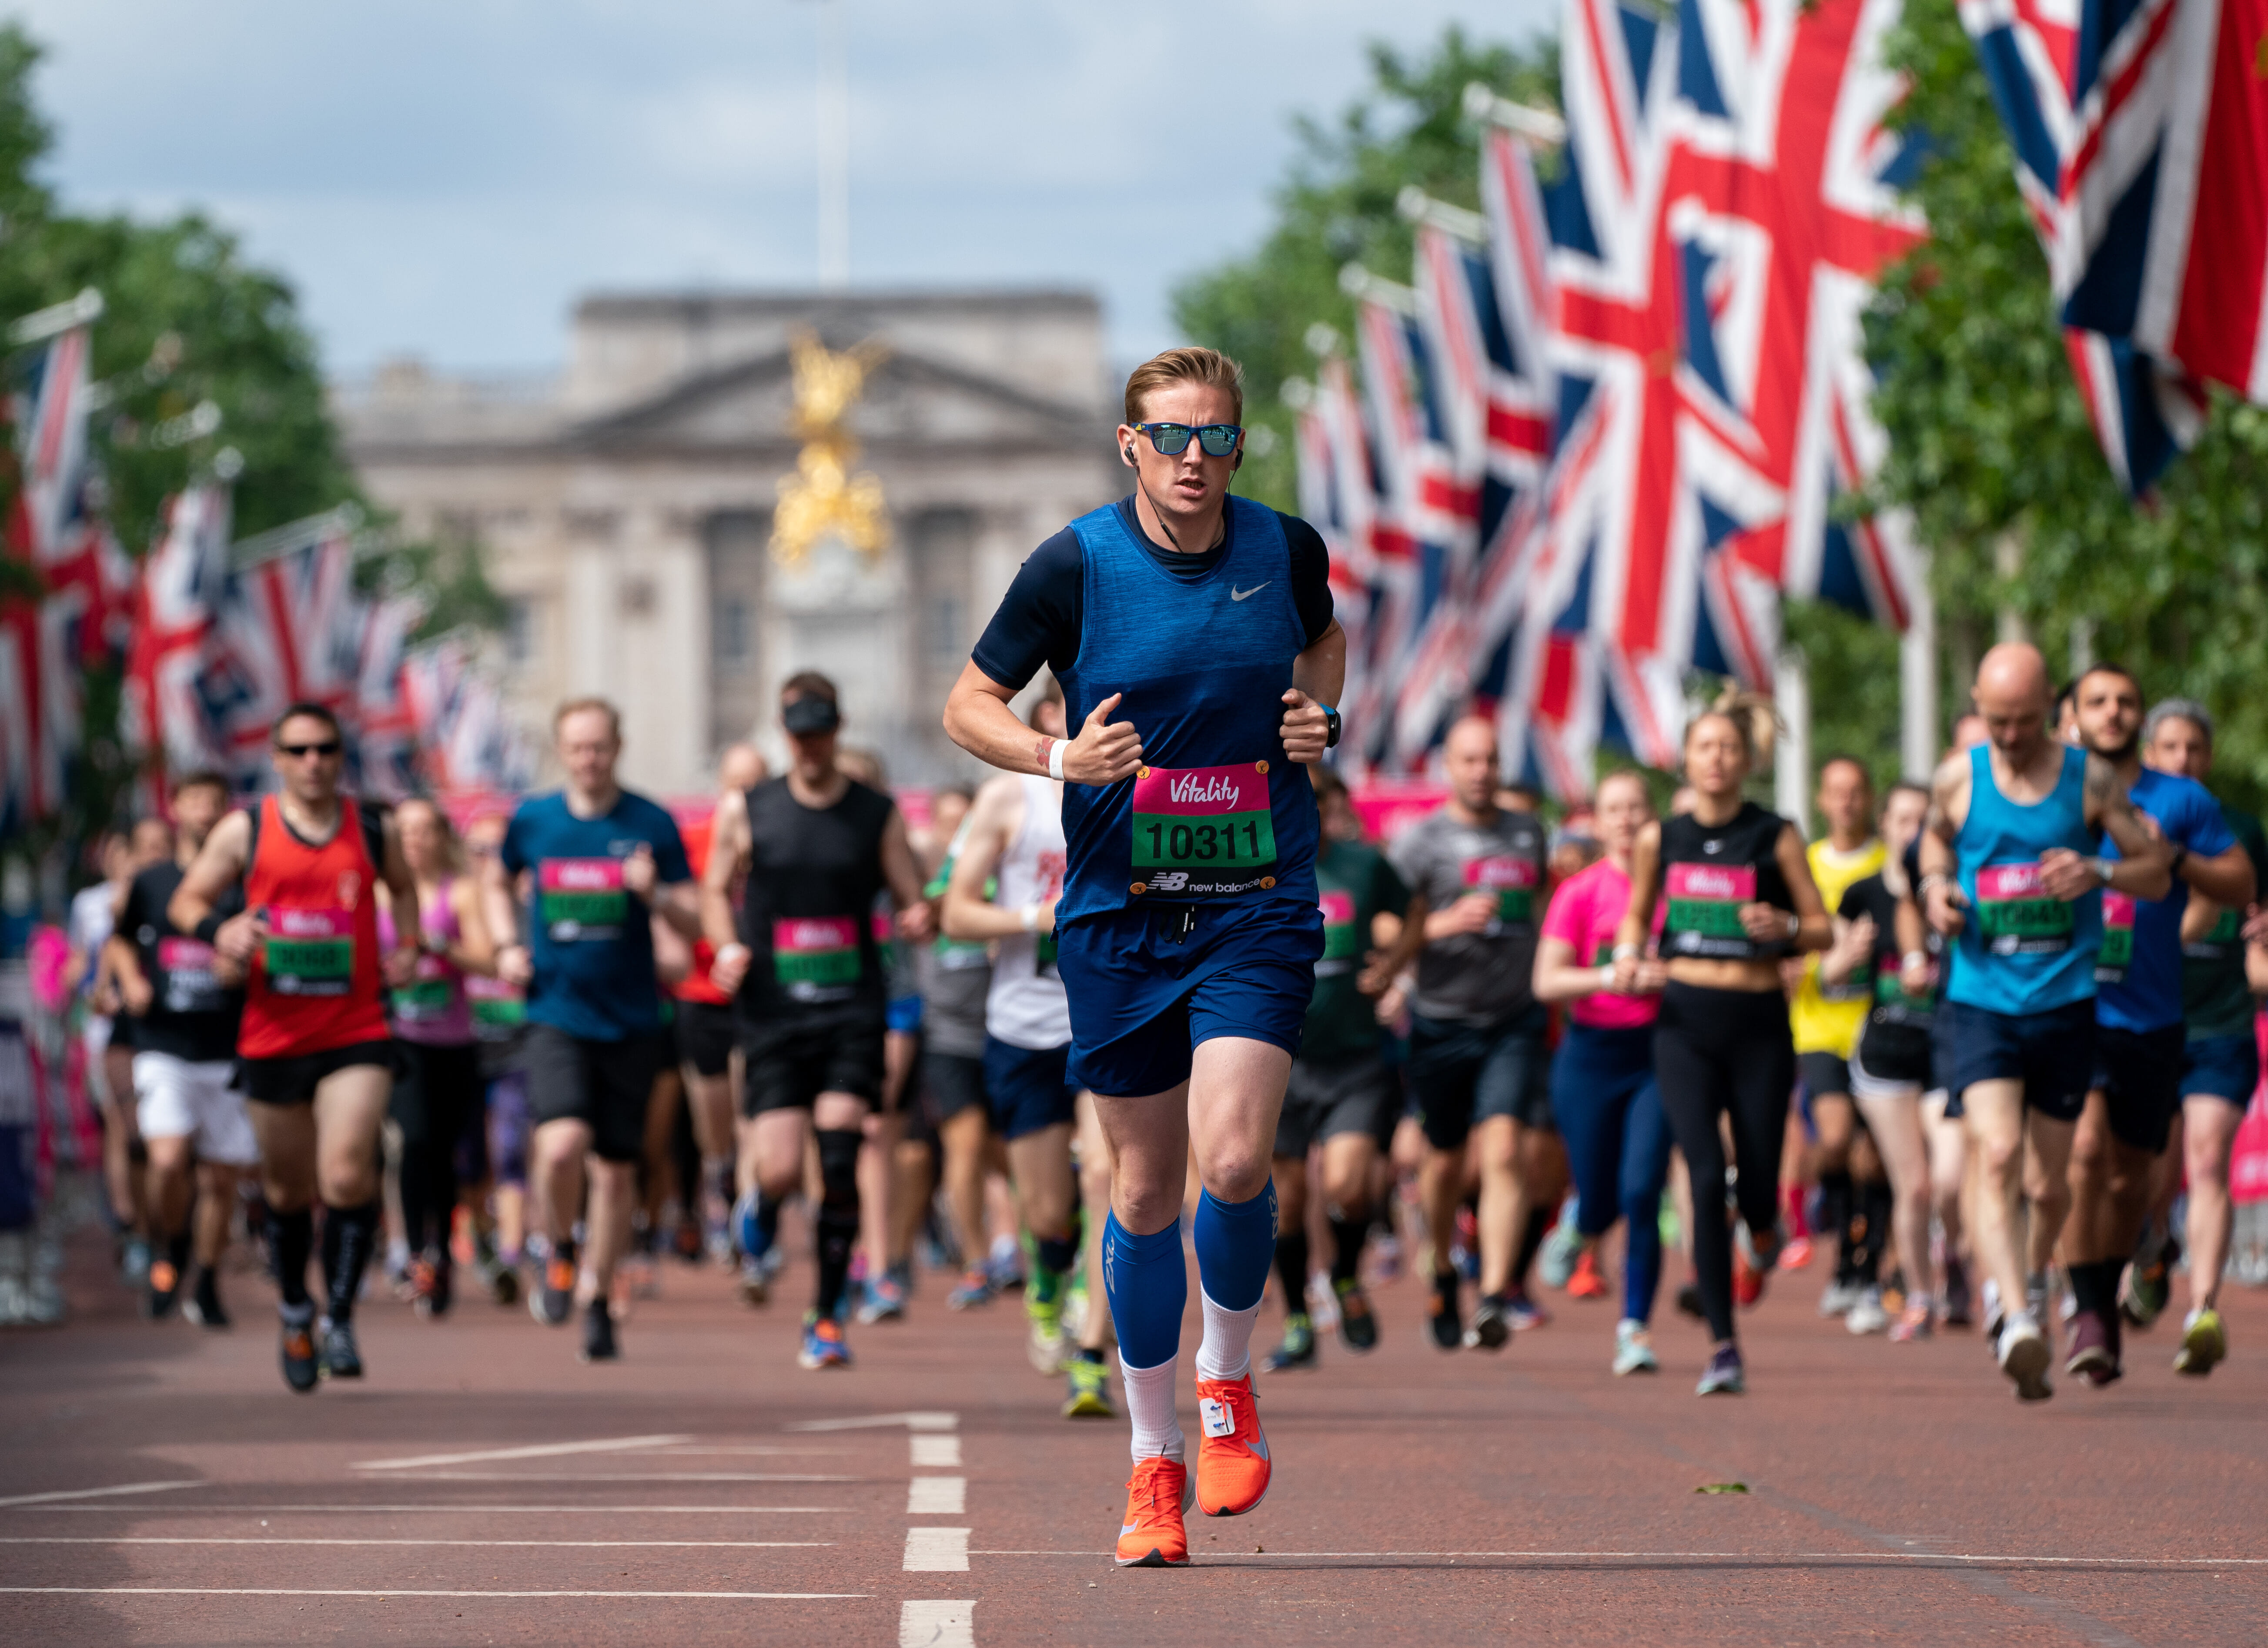 The London Marathon is the biggest run in the UK